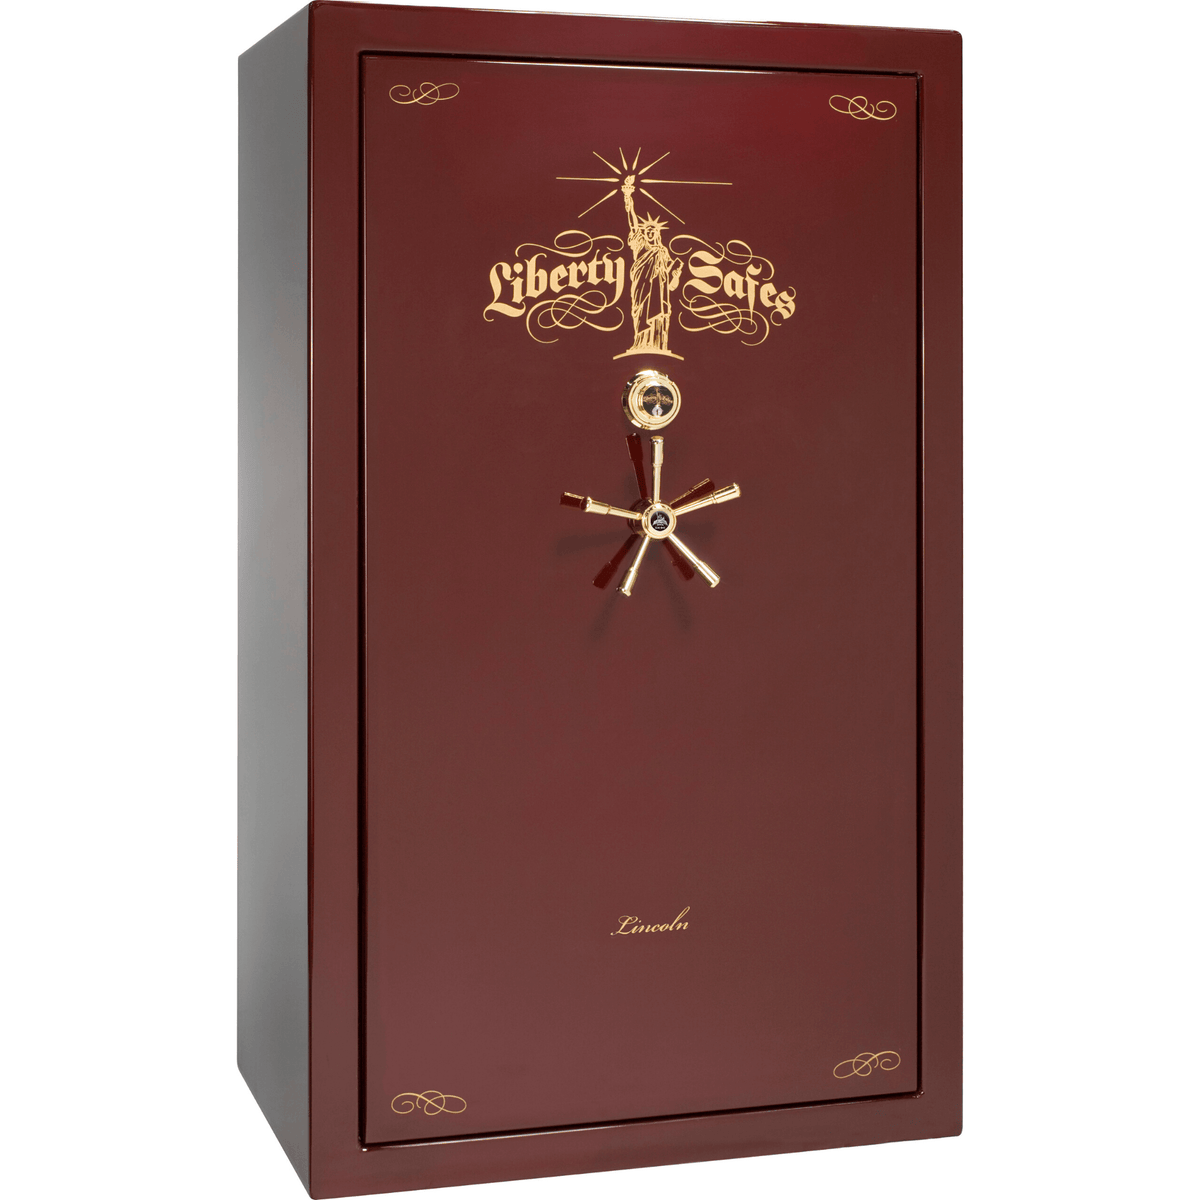 Liberty Lincoln 50 Safe in Burgundy Gloss with Brass Mechanical Lock.